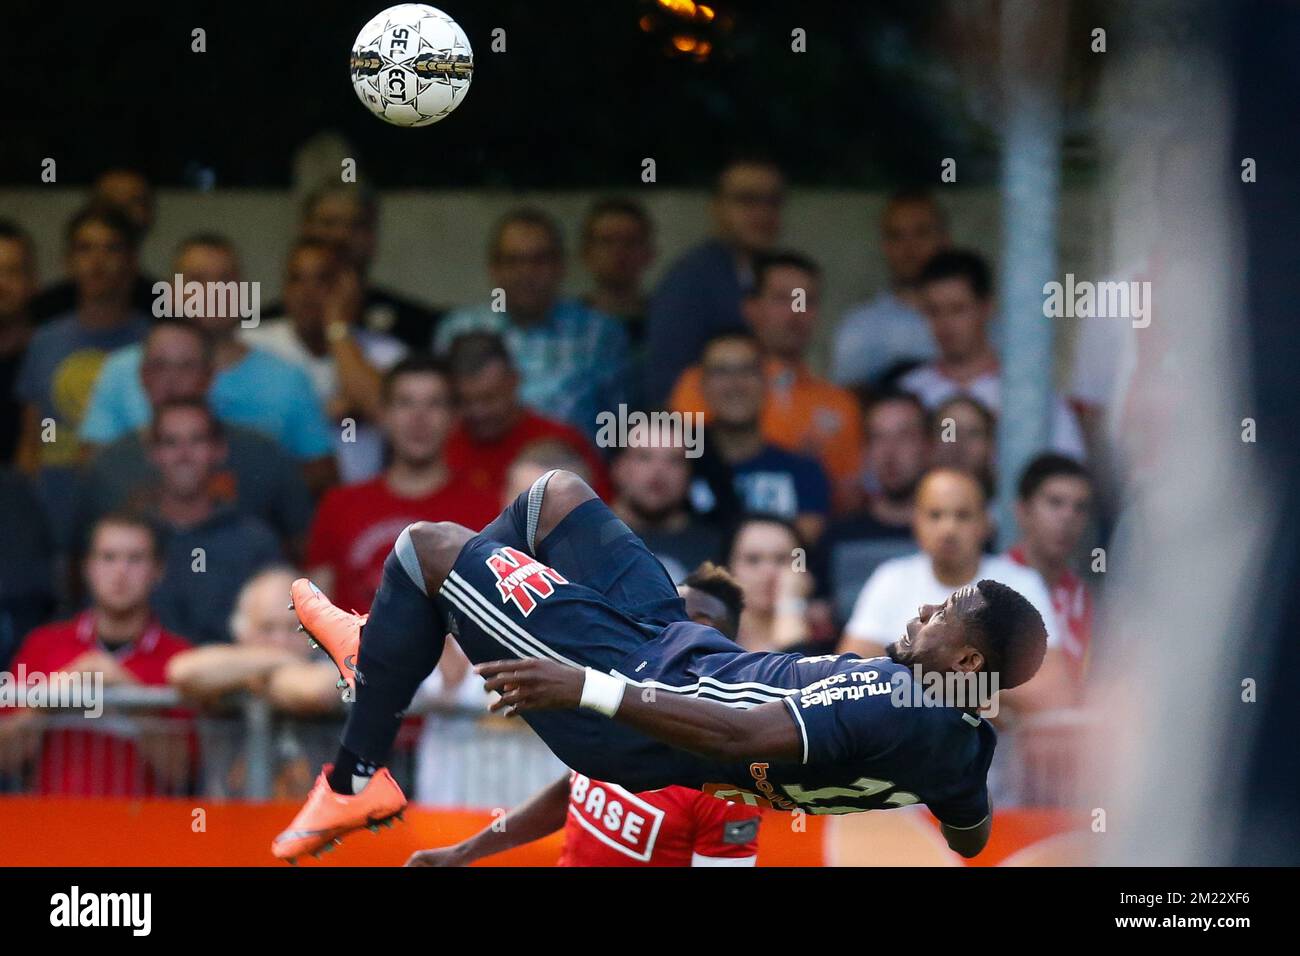 OM's Henri Bedimo pictured in action during a gala soccer game between Belgian first division team Standard de Liege and French first division Olympique de Marseille, Friday 02 September 2016 in Namur. Stock Photo